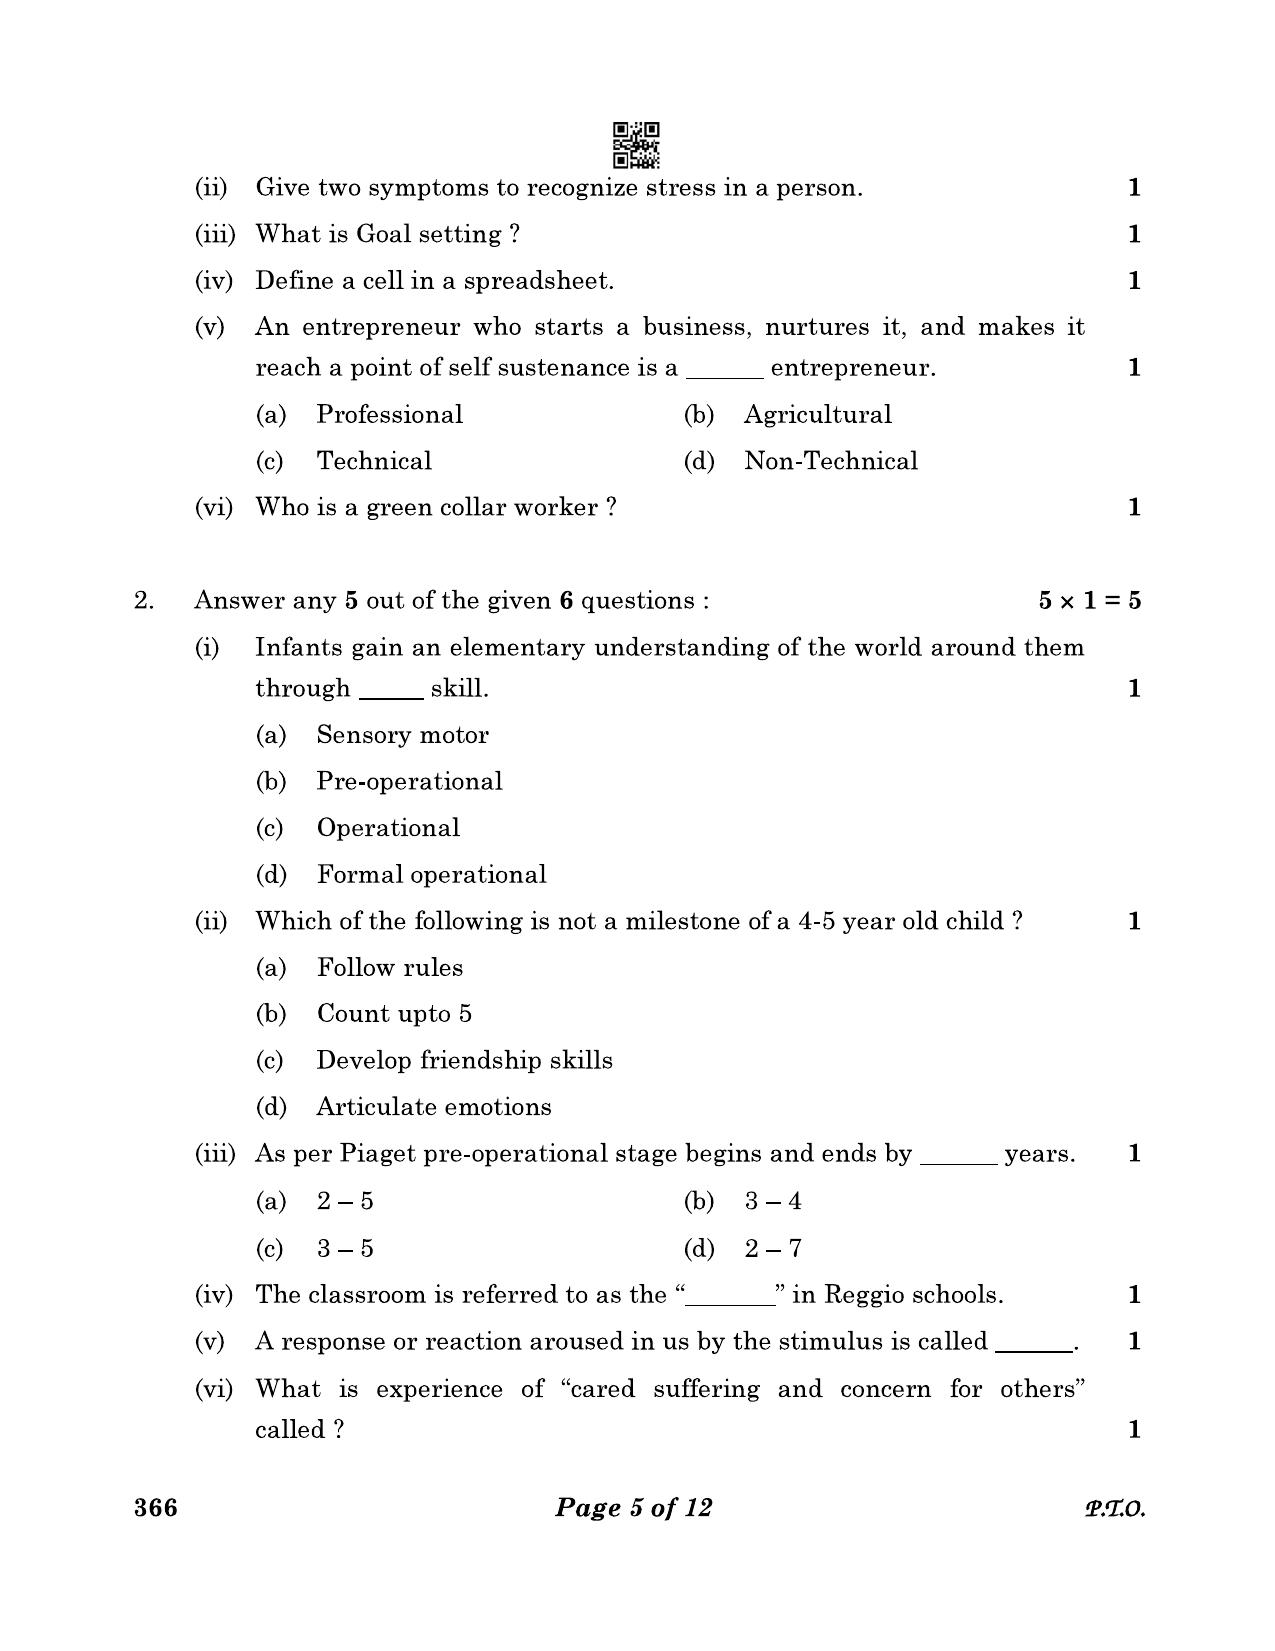 CBSE Class 12 366_Early Childhood Care & Education 2023 Question Paper - Page 5